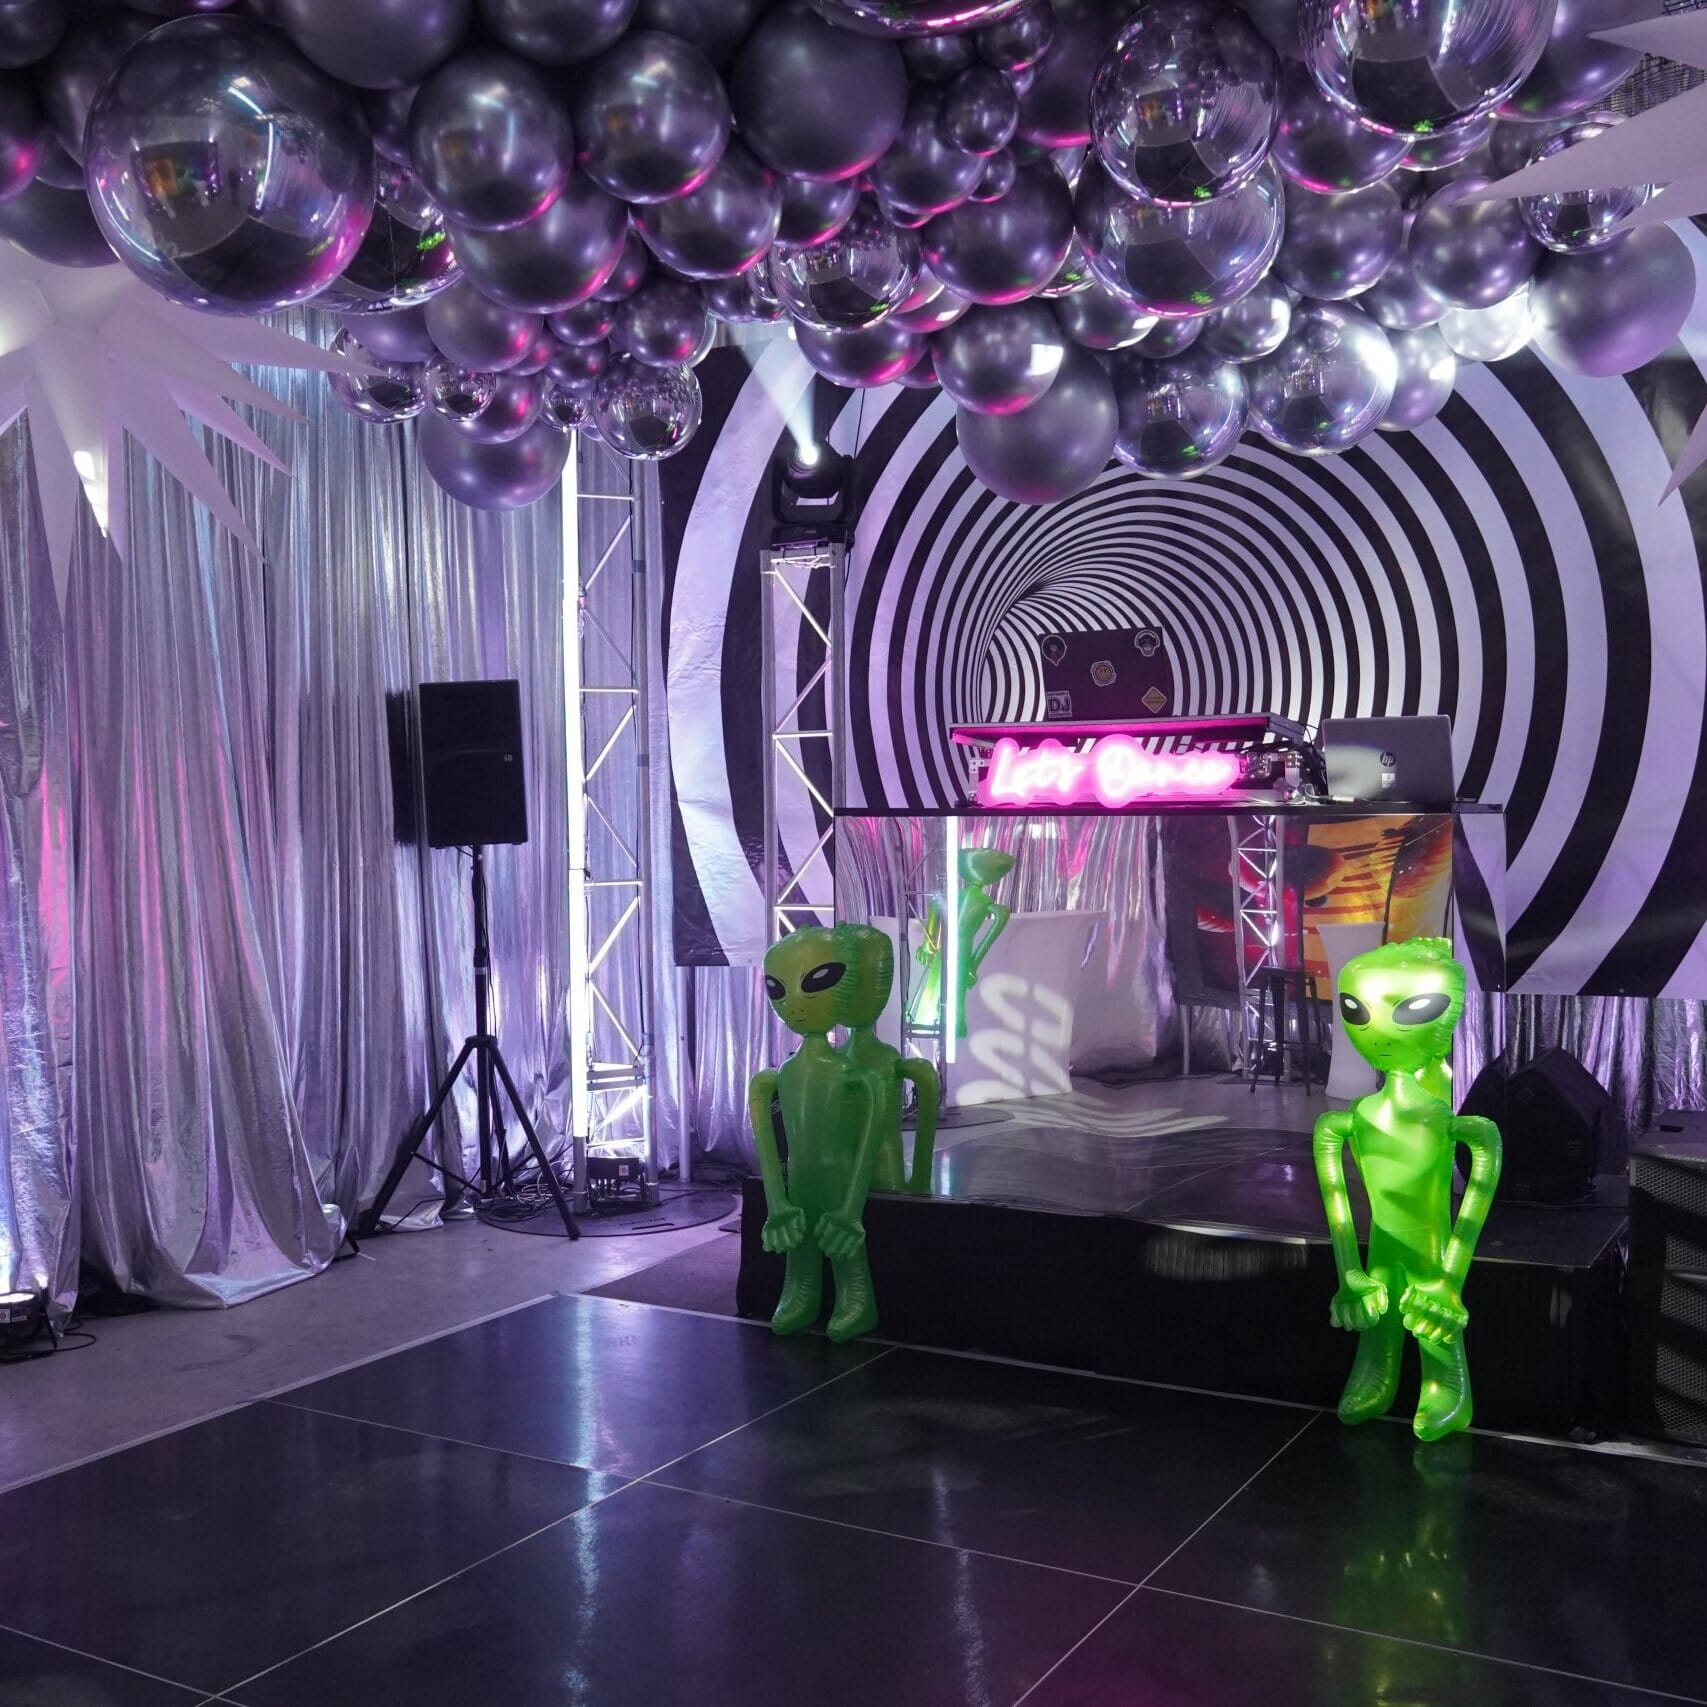 Dance floor area of space themed party. Party lights, inflatable props, balloons, themed backdrops.